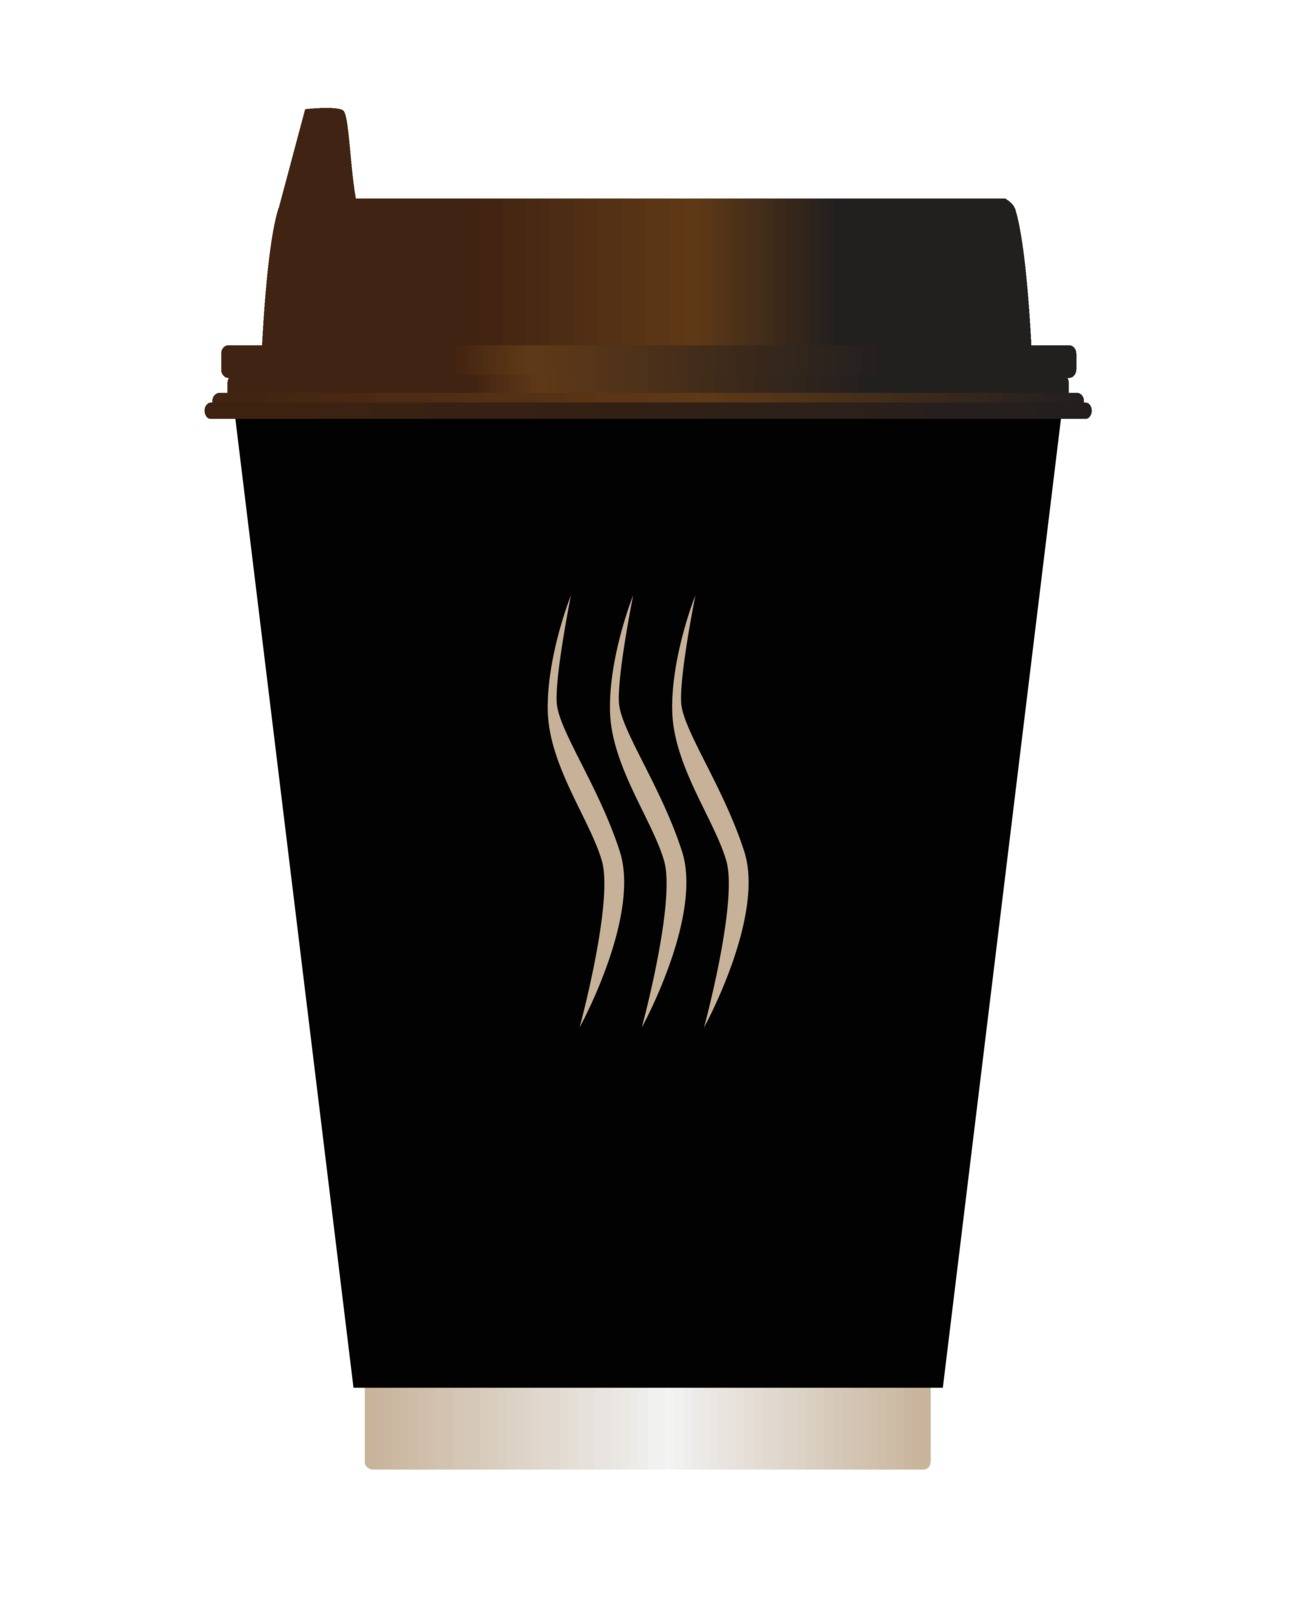 A typical paper coffee cup over a white background